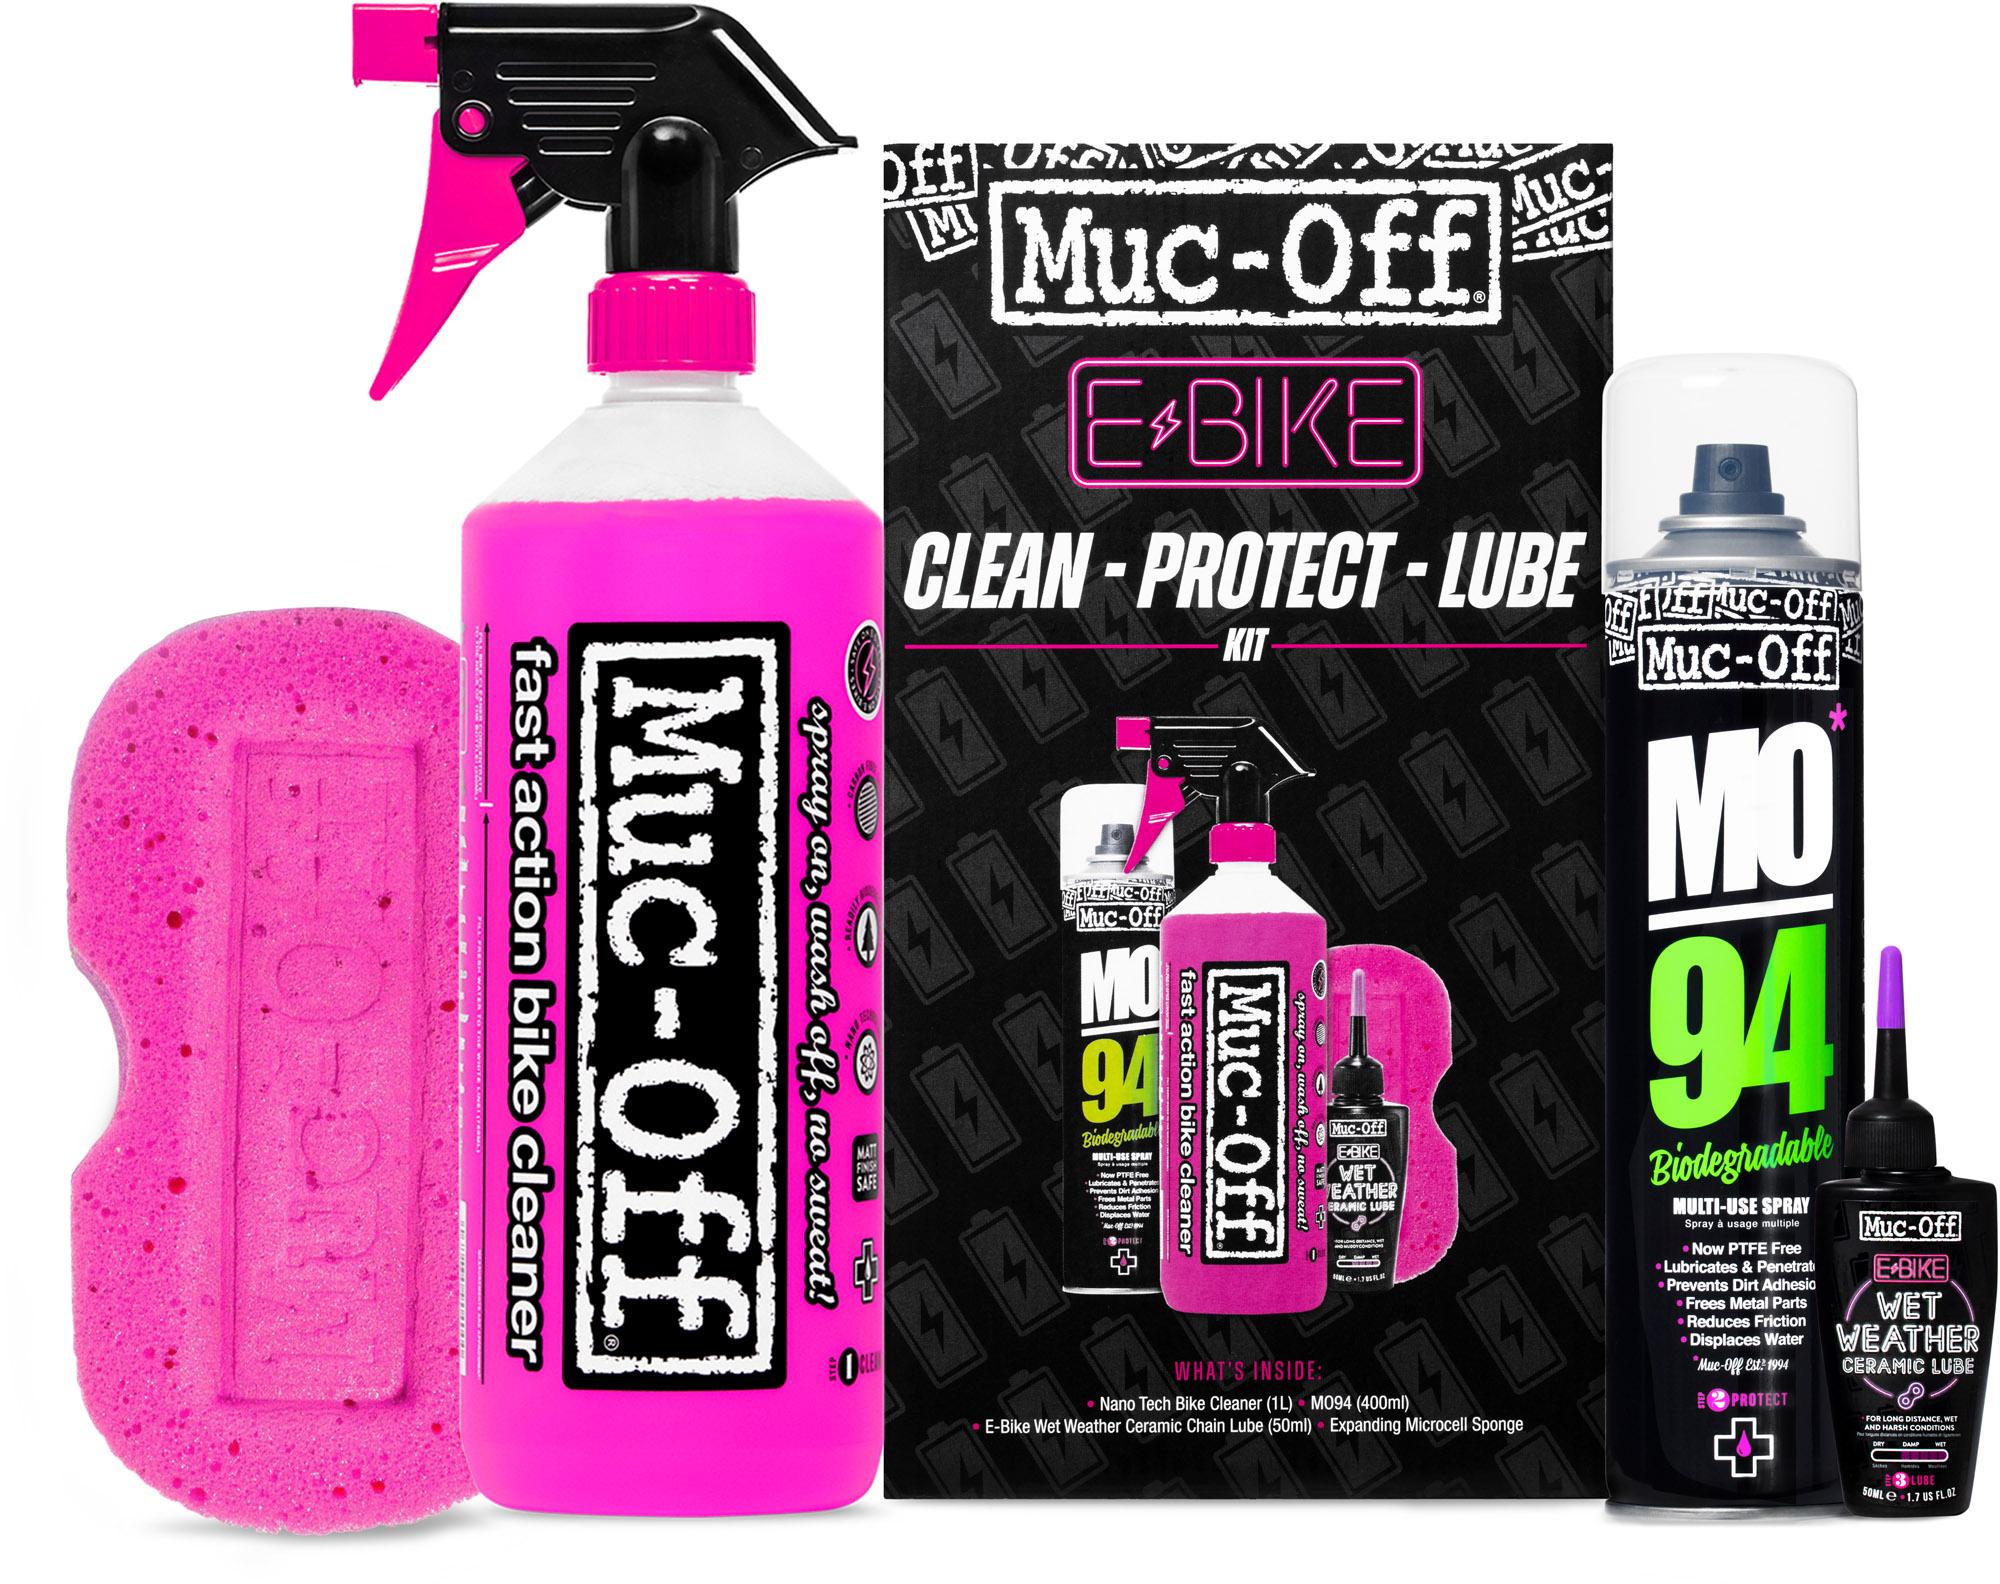 Muc-off Ebike Clean - Protect And Lube Kit - Black